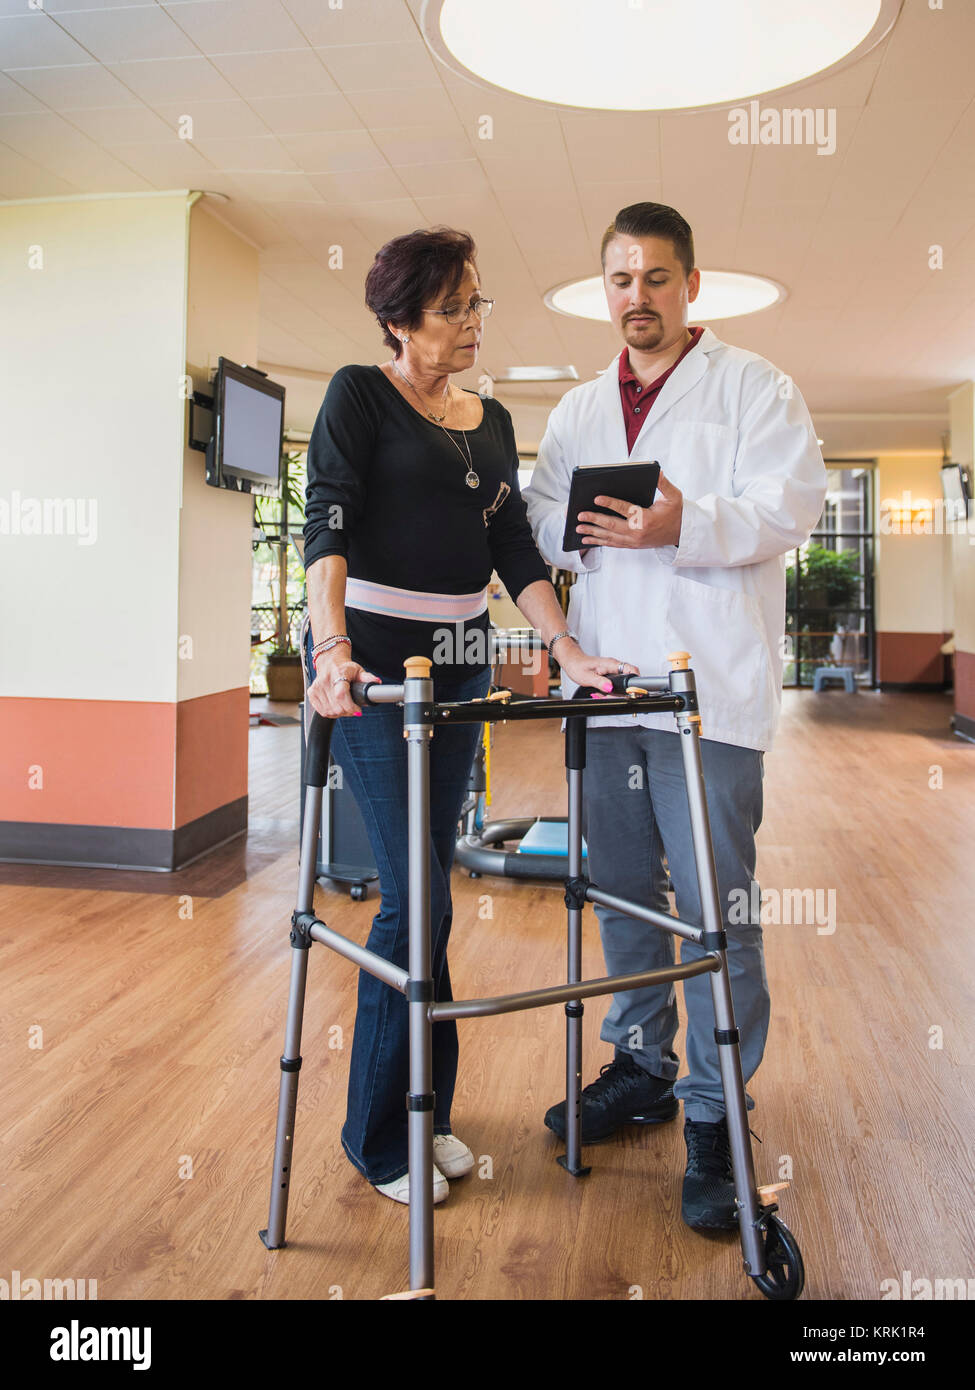 Caucasian physical therapist showing digital tablet to patient Stock Photo